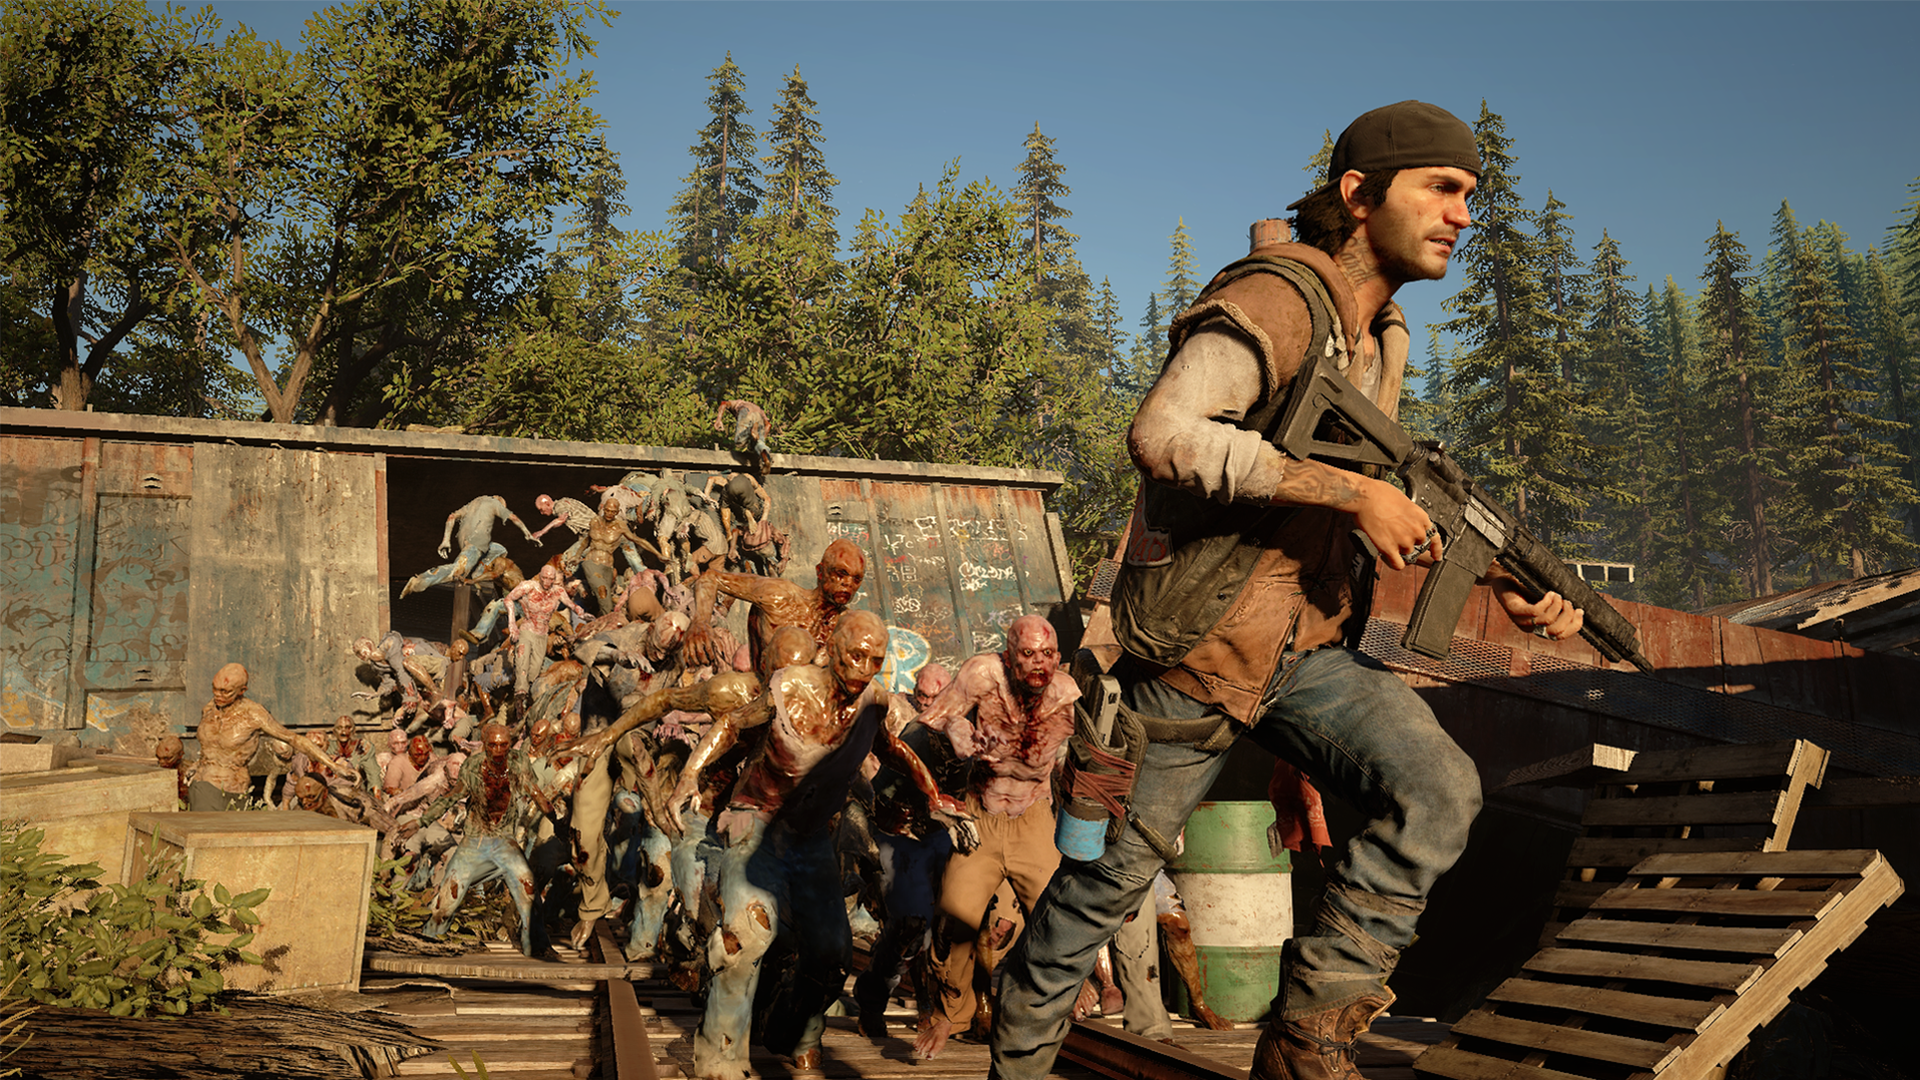 PS4's 'Days Gone' Looks Like 'The Last of Us' Meets 'World War Z' In New  Gameplay